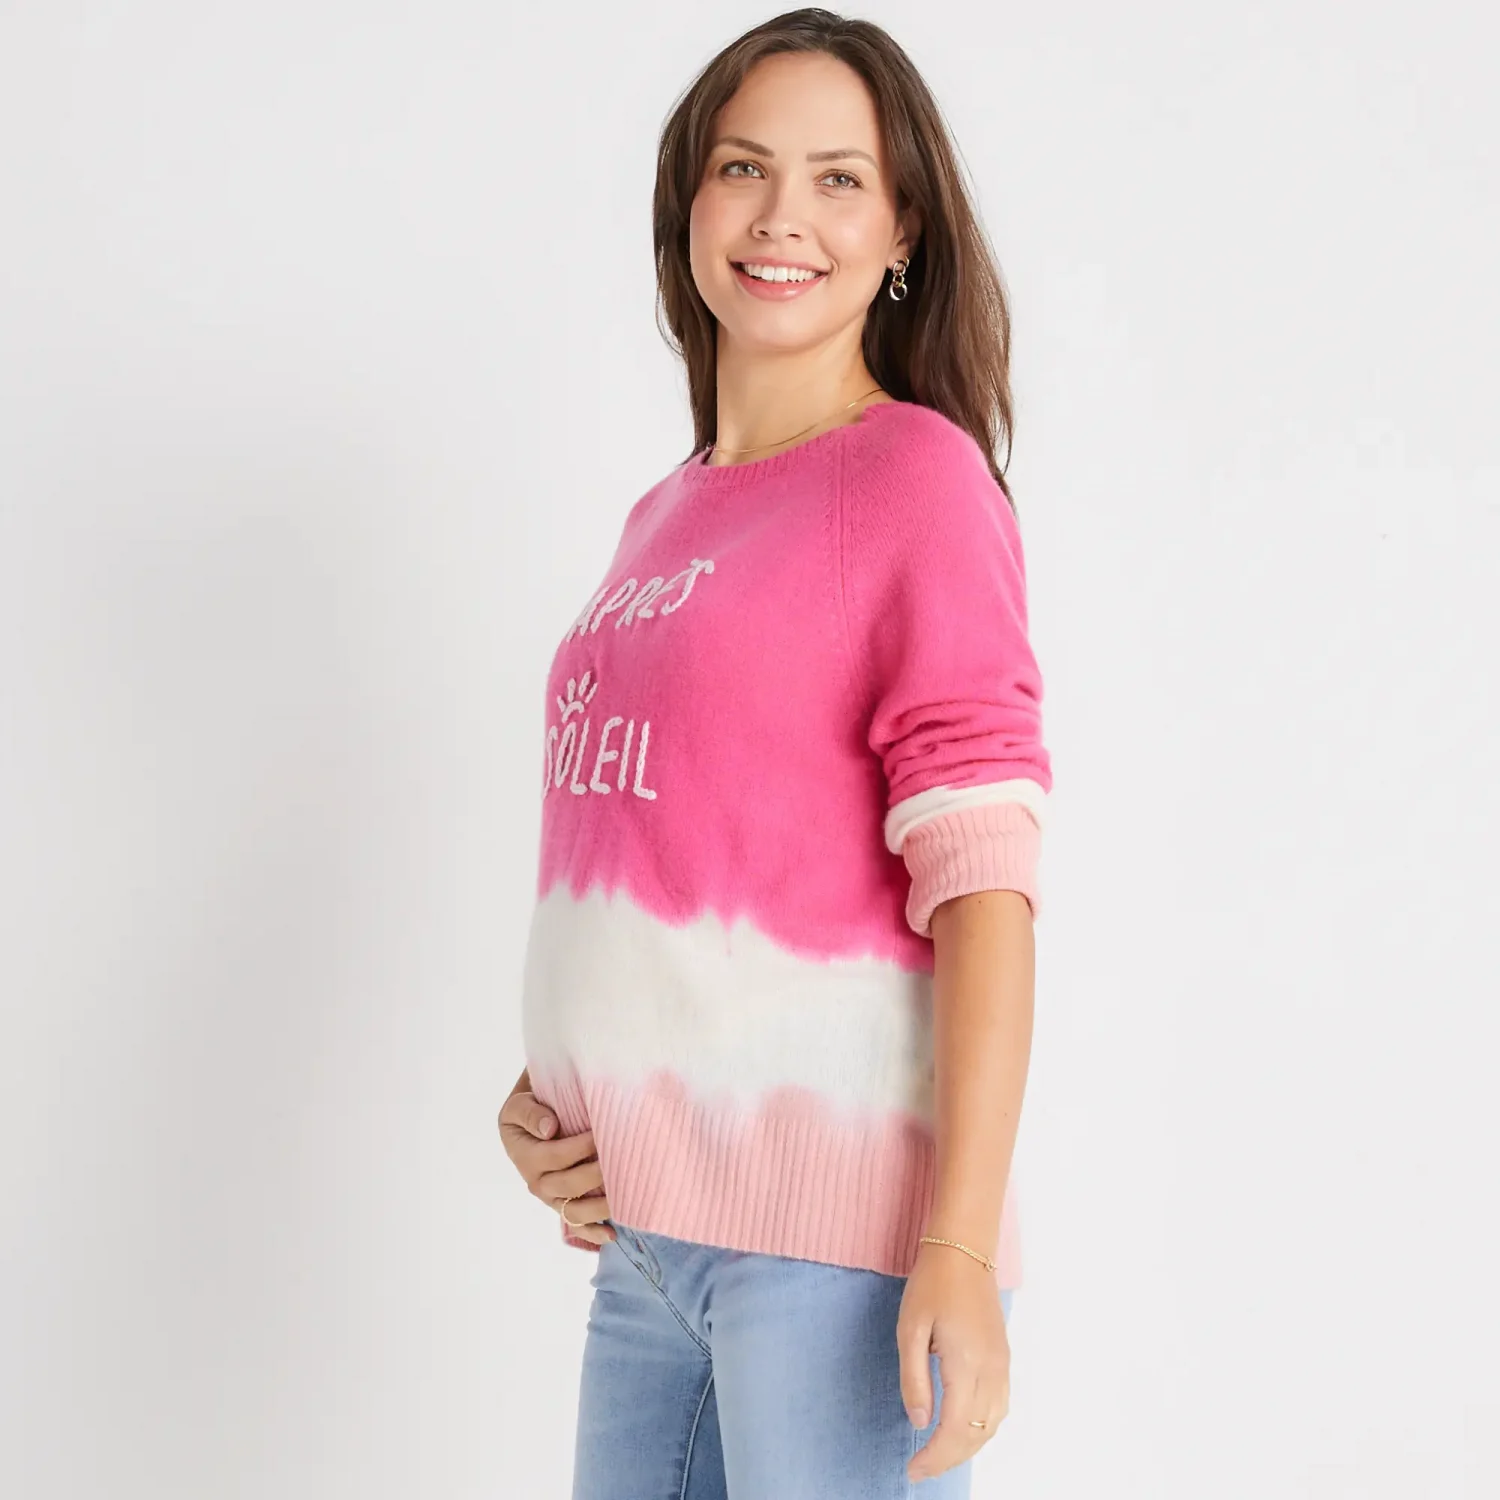 Golden Sun brand contemporary and stylish maternity friendly tie dye cashmere sweater tops